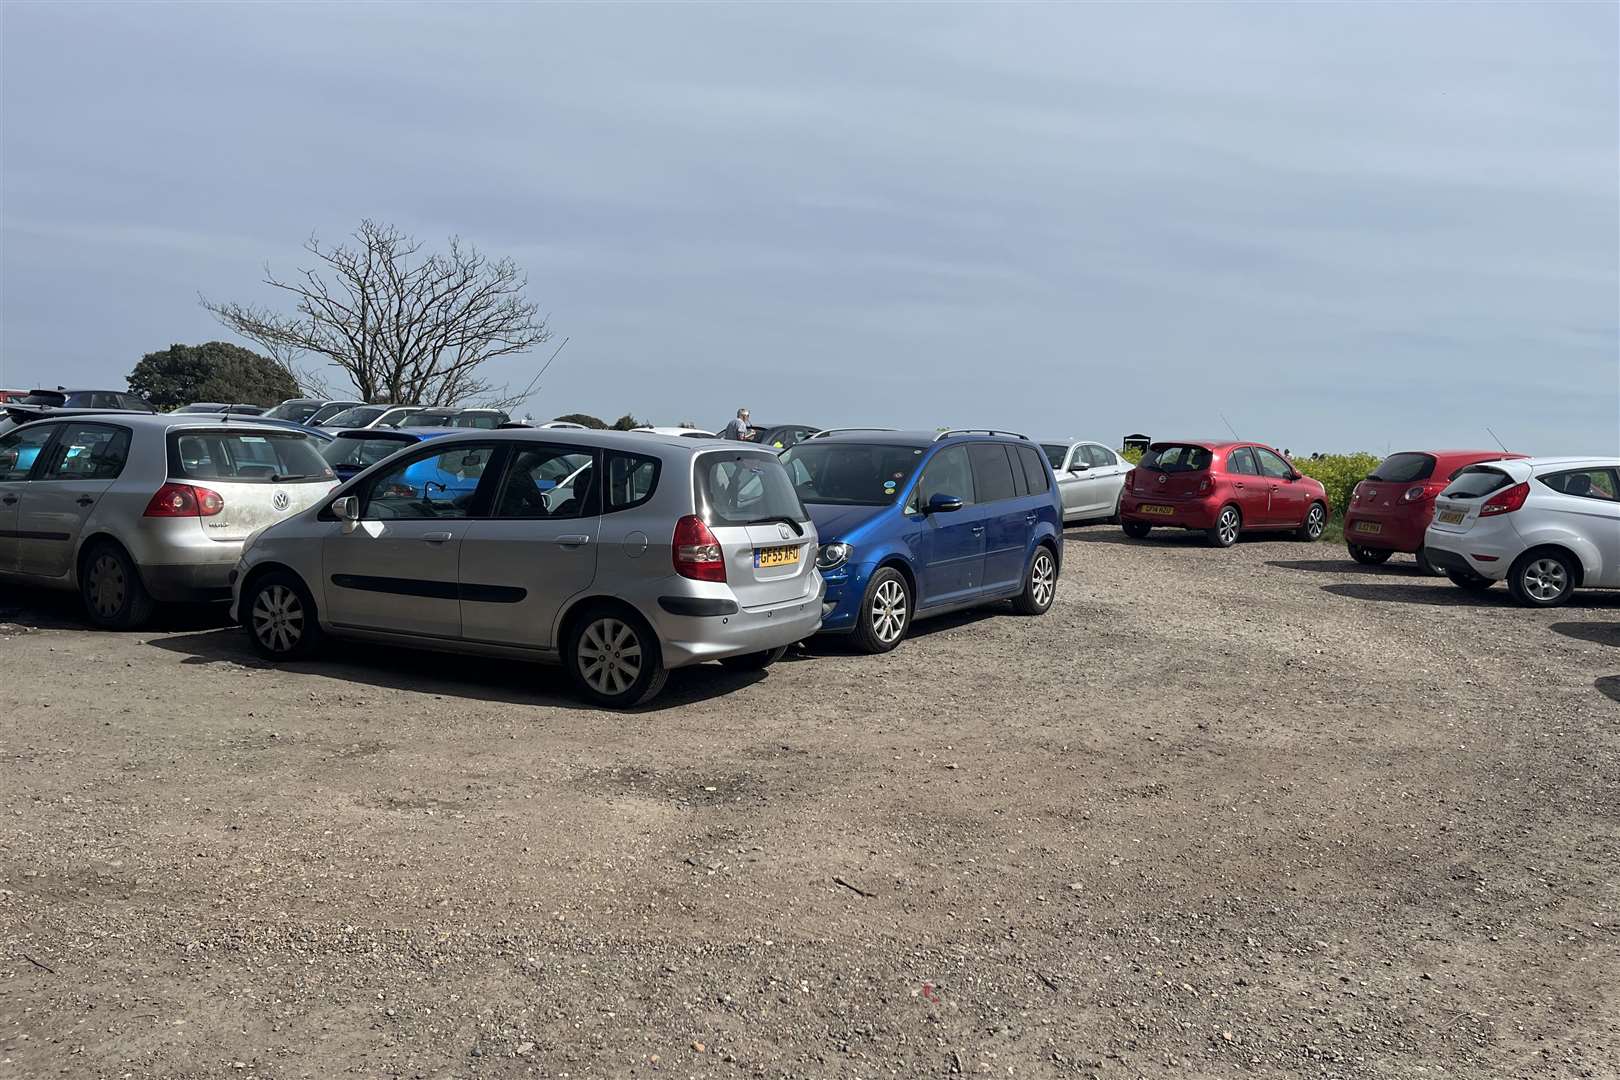 The nearest available parking to the English Heritage site is the seafront Walmer Castle car park